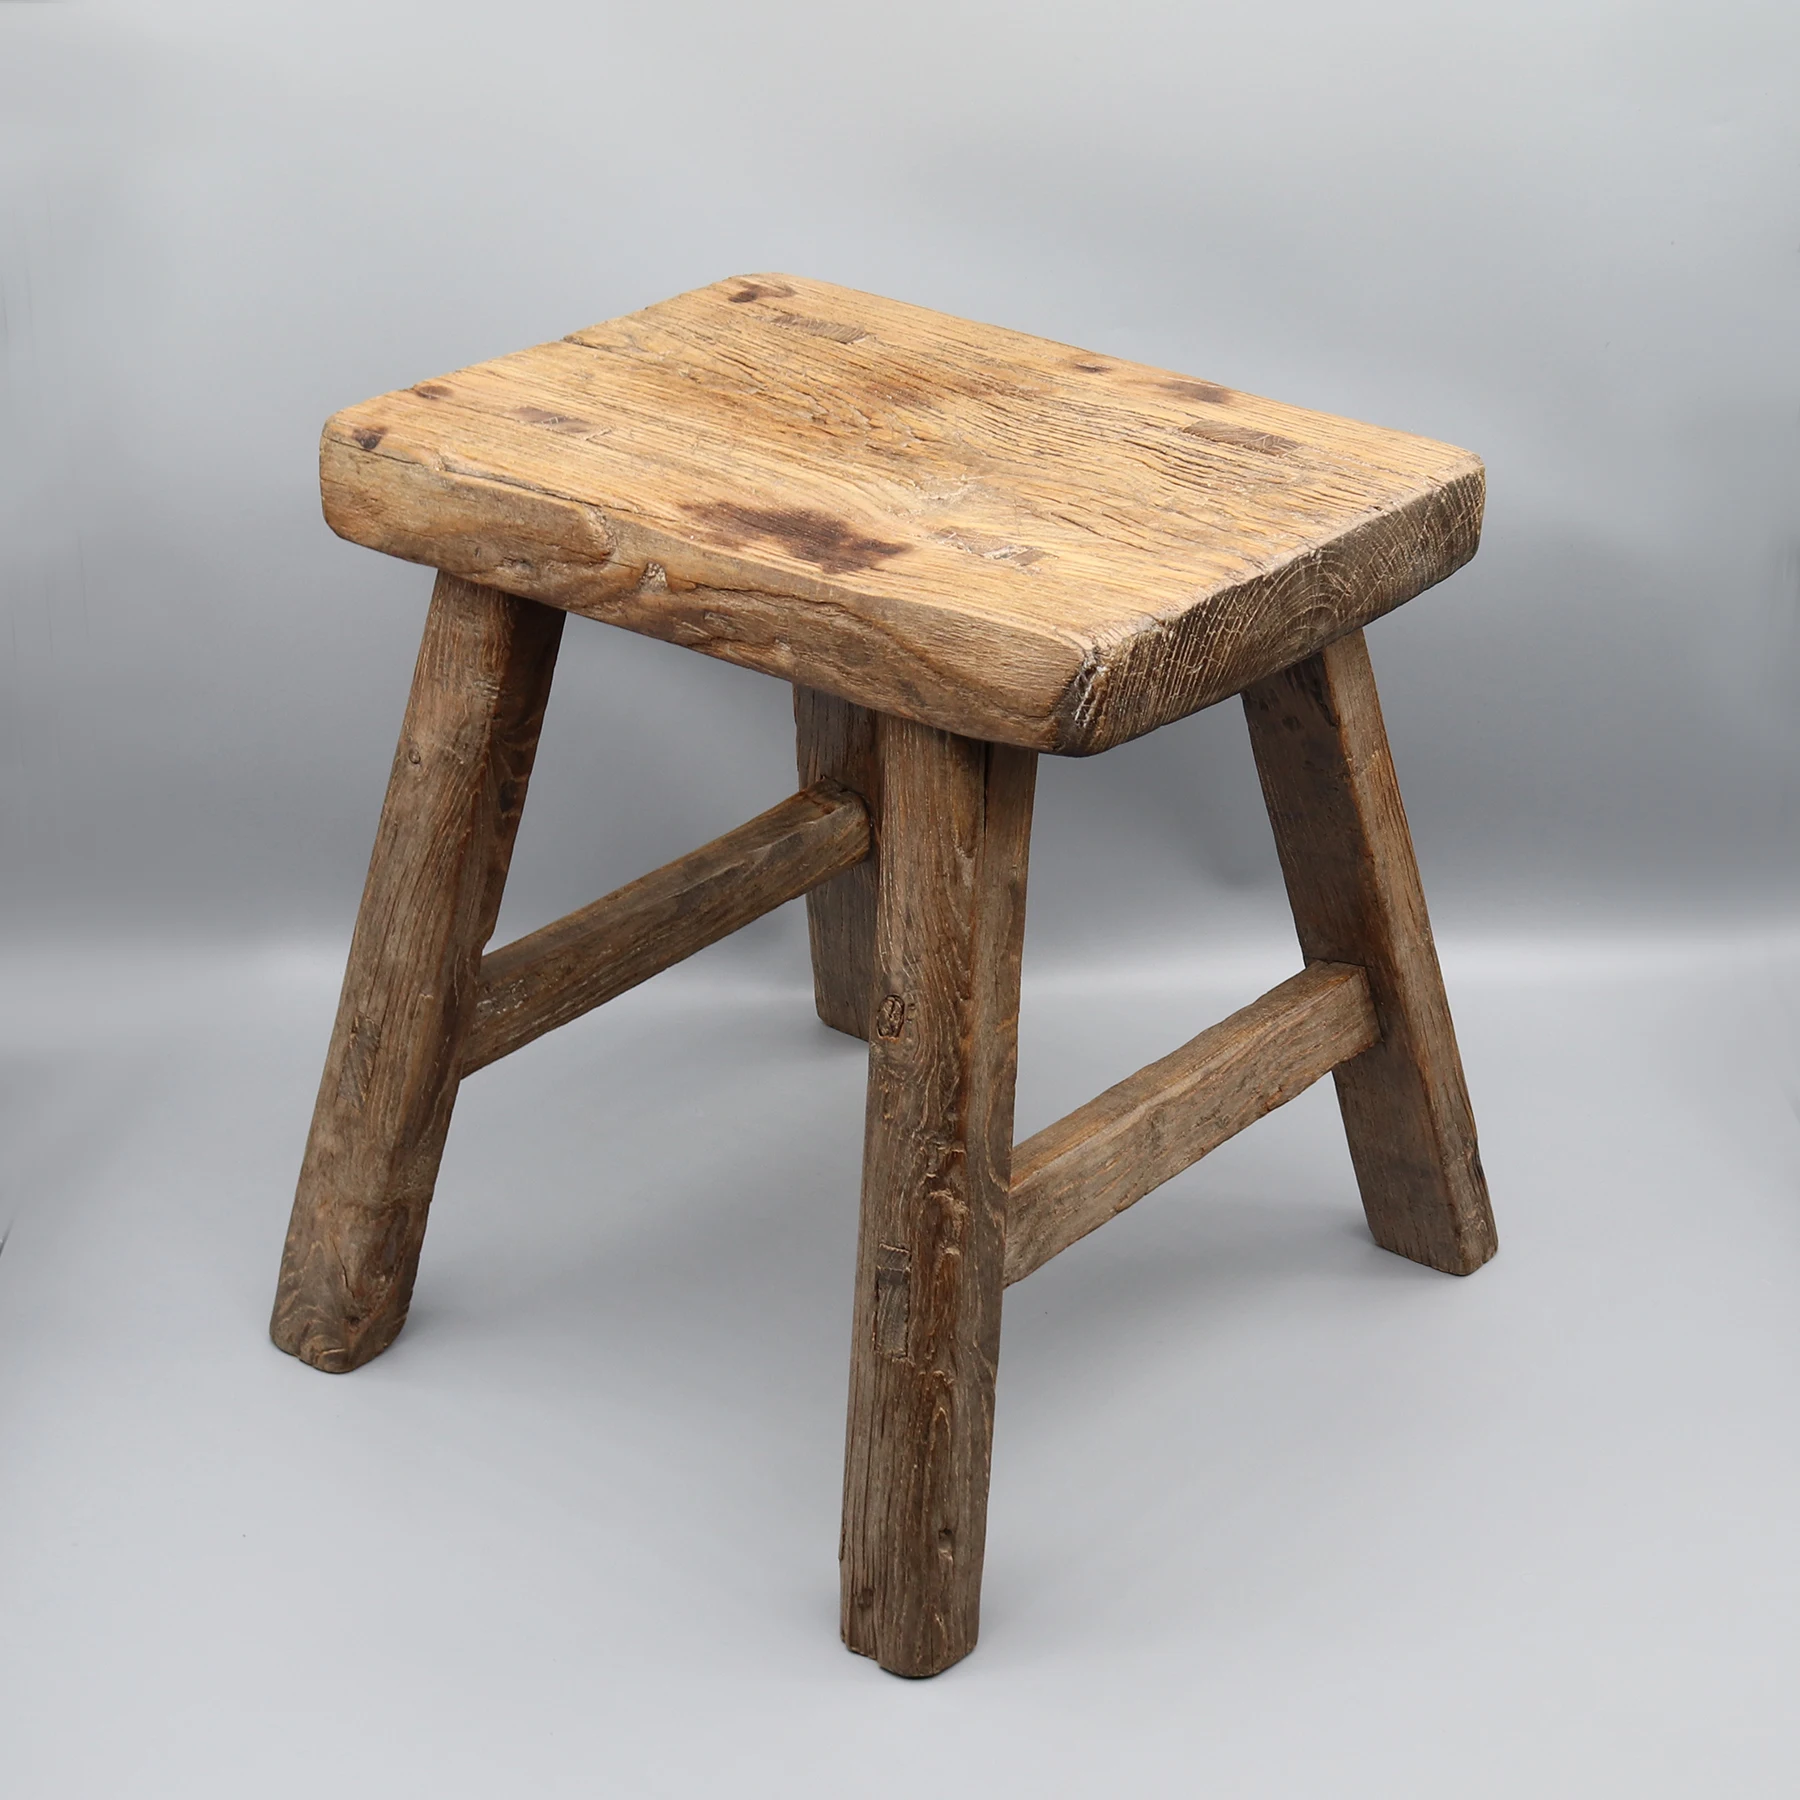 old-wooden-stool-plant-stand-bathroom-stool-small-side-table-home-decoration